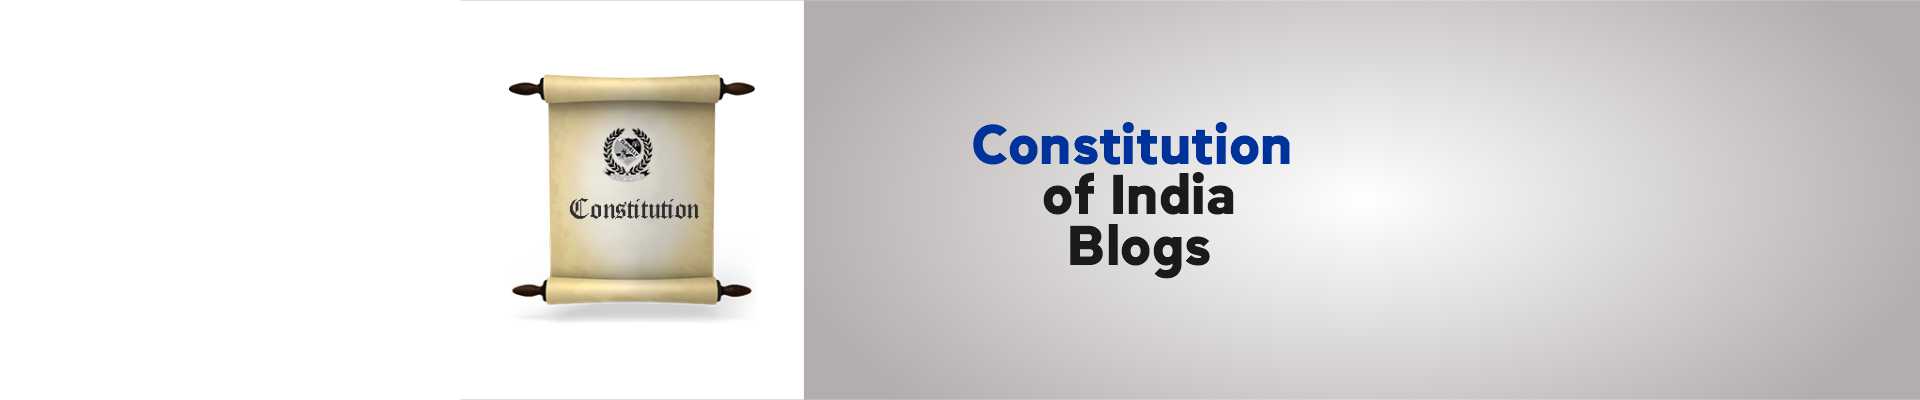 THE CONSTITUTION OF INDIA -- BLOGS